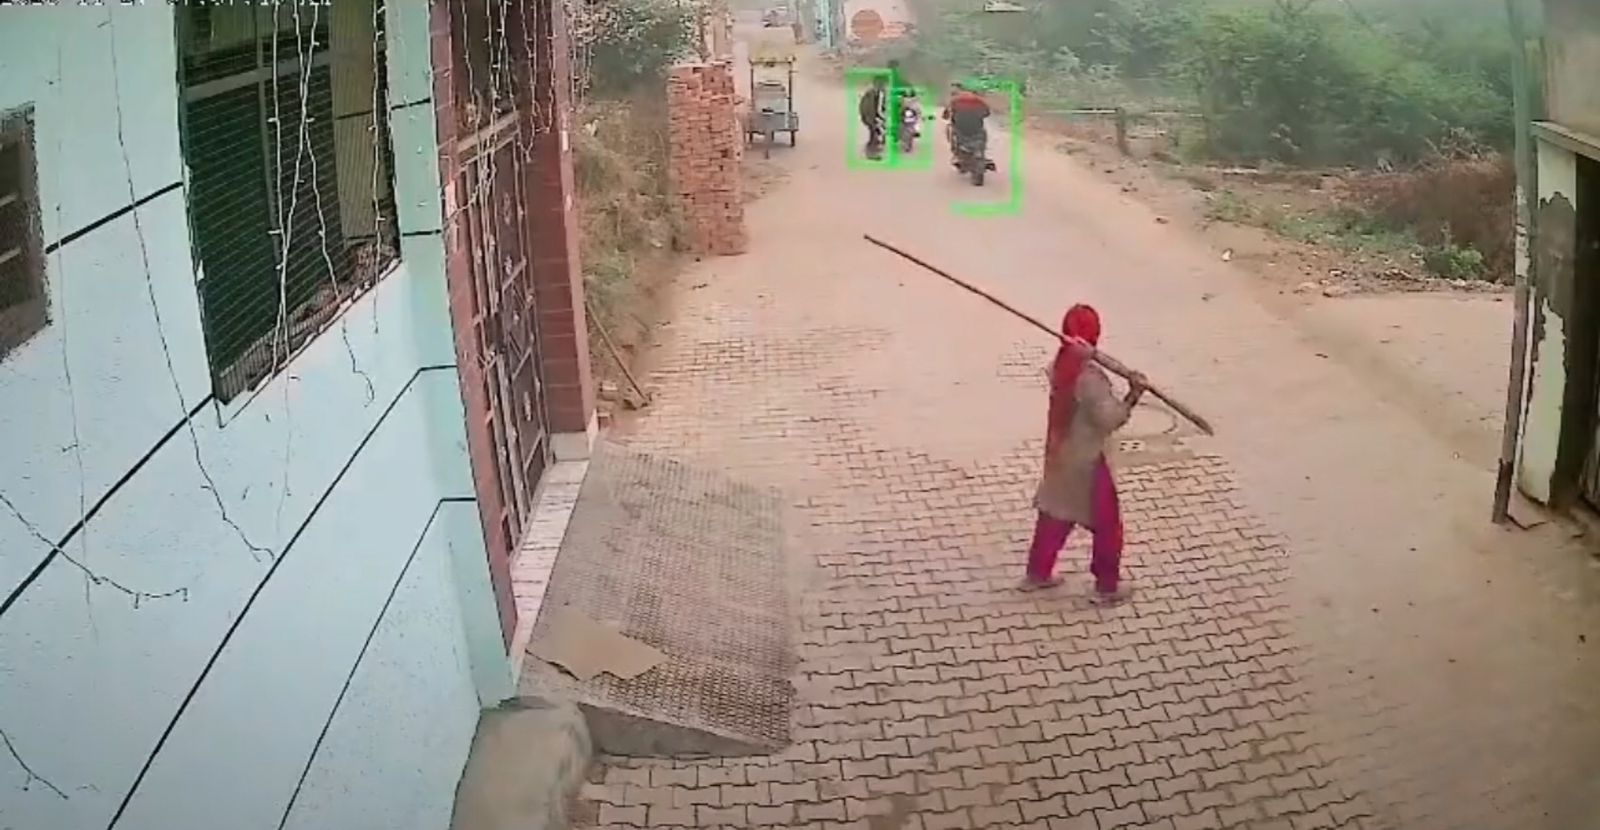 The woman chased away the miscreants